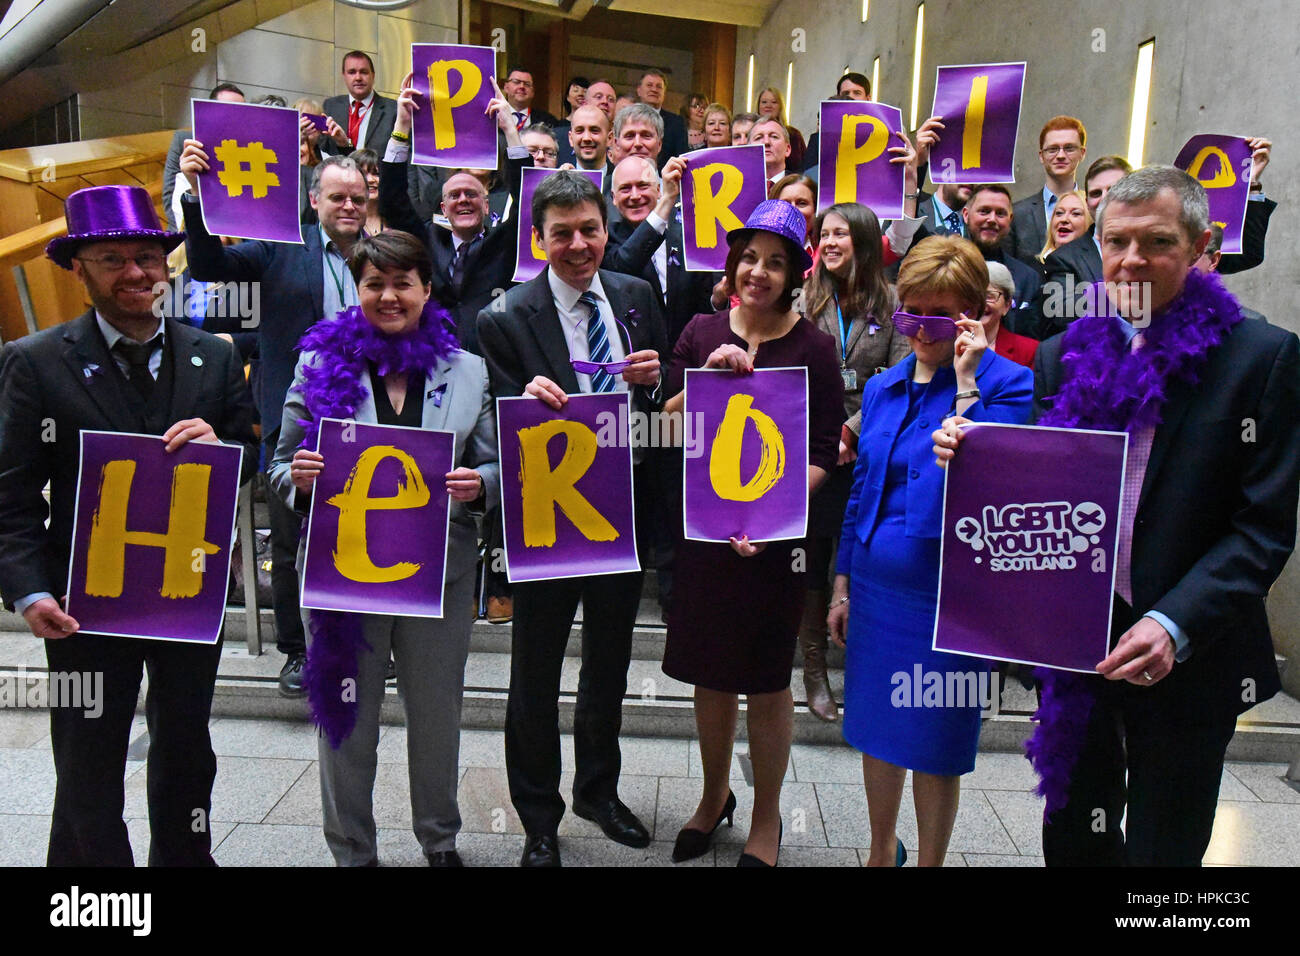 Edinburgh, Scotland, UK. 23rd Feb, 2017. First Minister Nicola Sturgeon wears purple spectacles as she joins Scottish Ministers, other party leaders, and MSPs at a photocall in the Scottish Parliament to show support for LGBTI youth ahead of '#Purple Day' Front Row L to R: Patrick Harvie, Ruth Davidson, Presiding Officer Ken Macintosh, Kezia Dugdale, Nicola Sturgeon, Willie Rennie Credit: Ken Jack/Alamy Live News Stock Photo